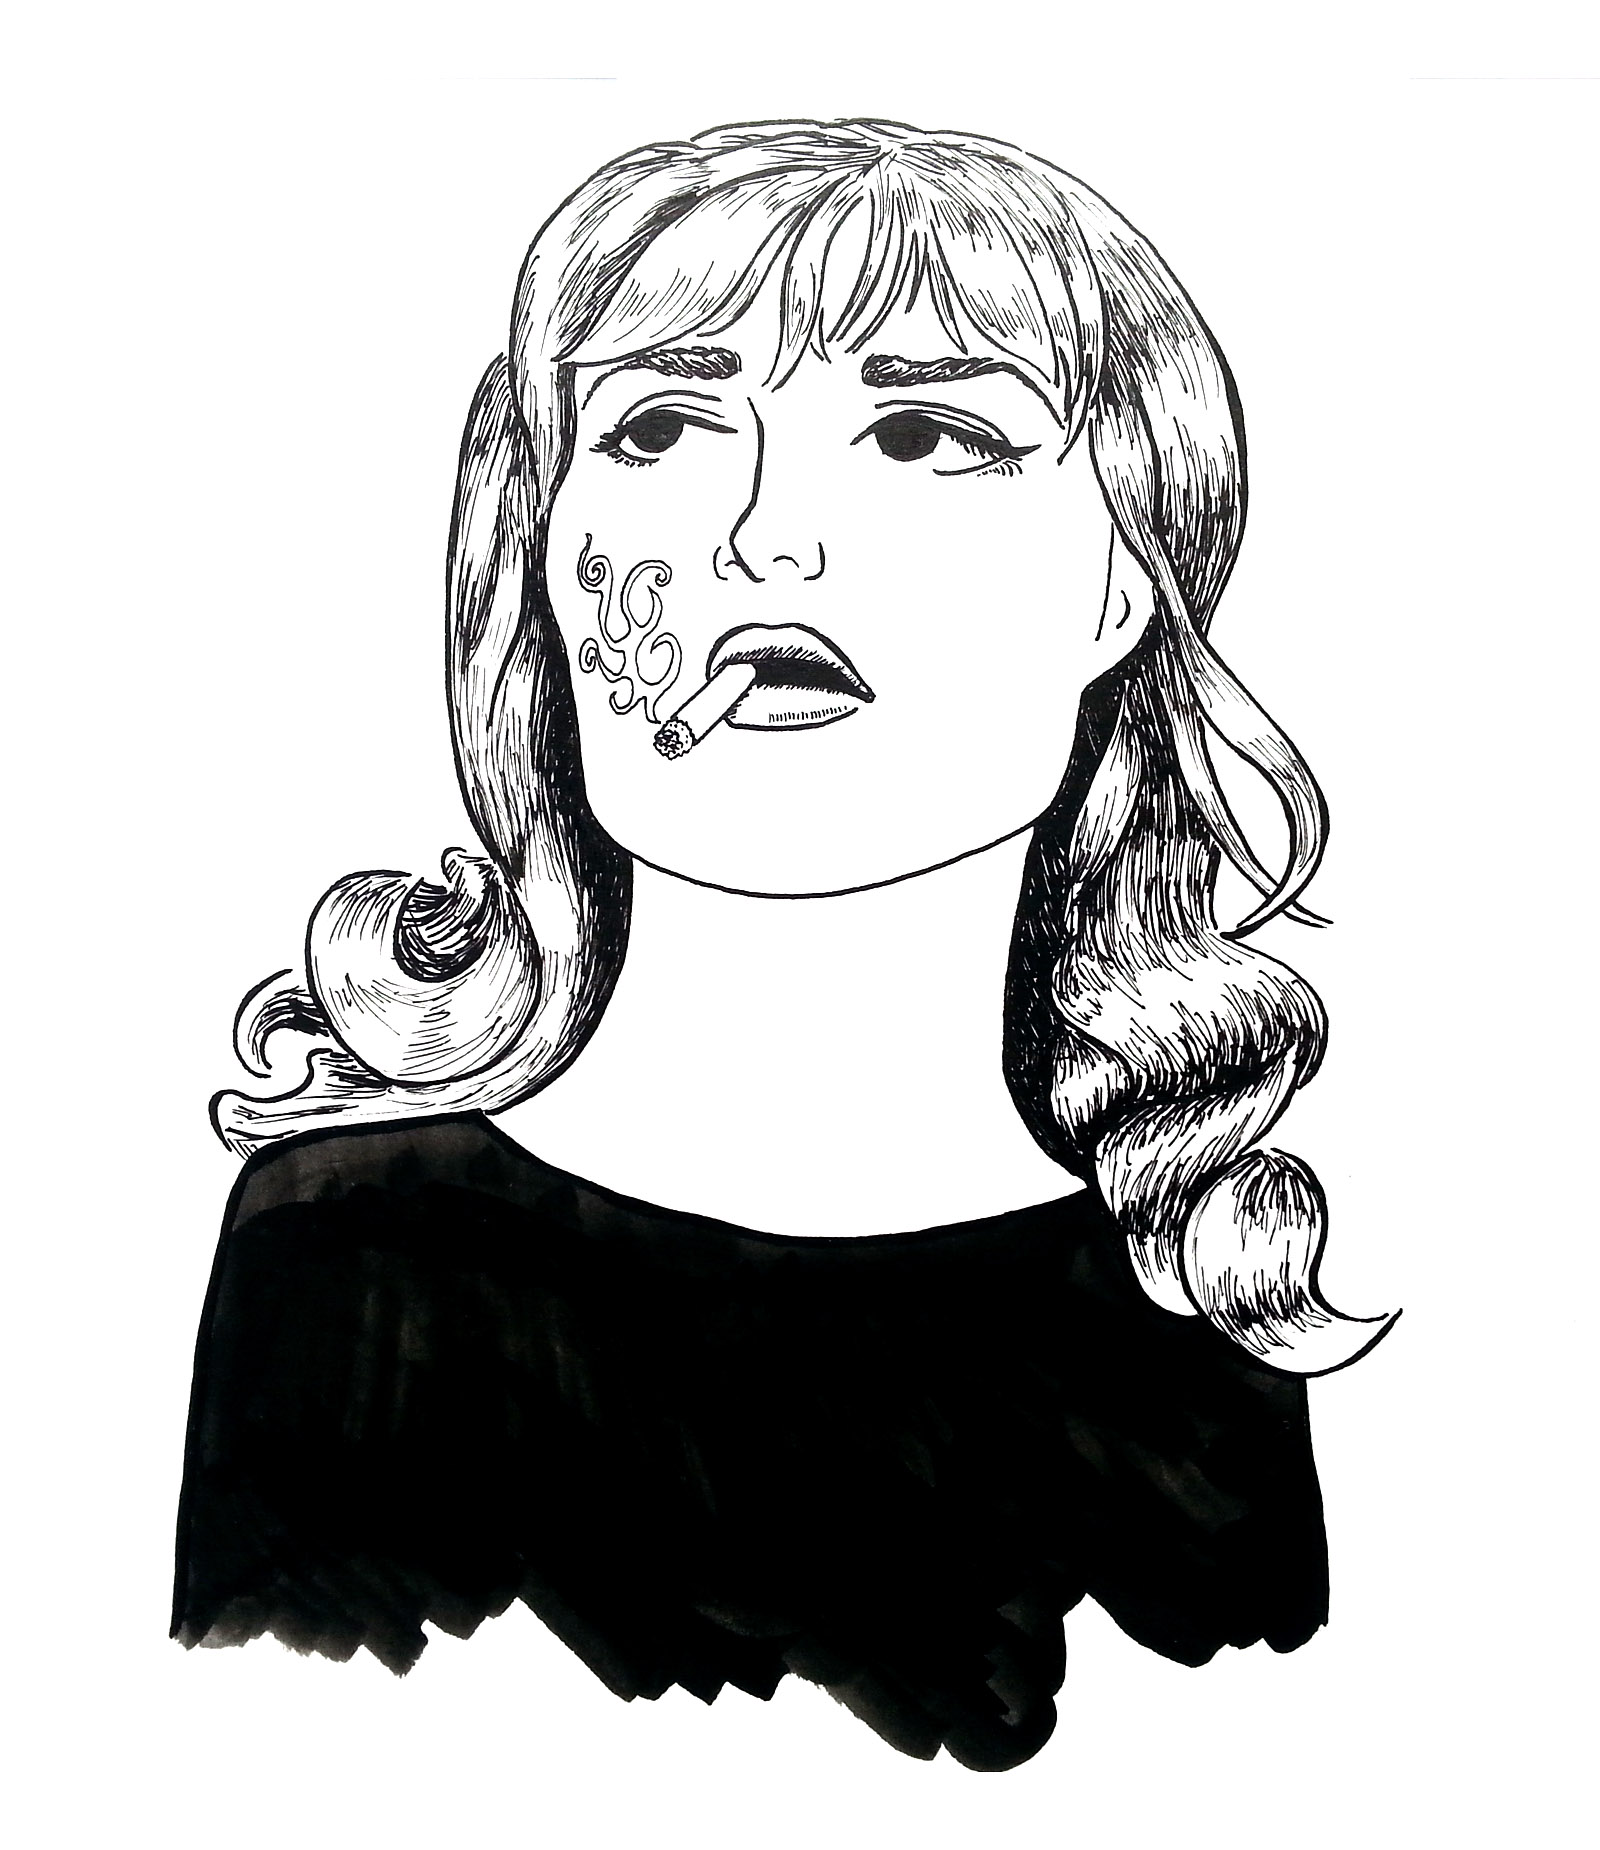 Pen and ink portrait of French actress Jeanne Moreau smoking a cigarette